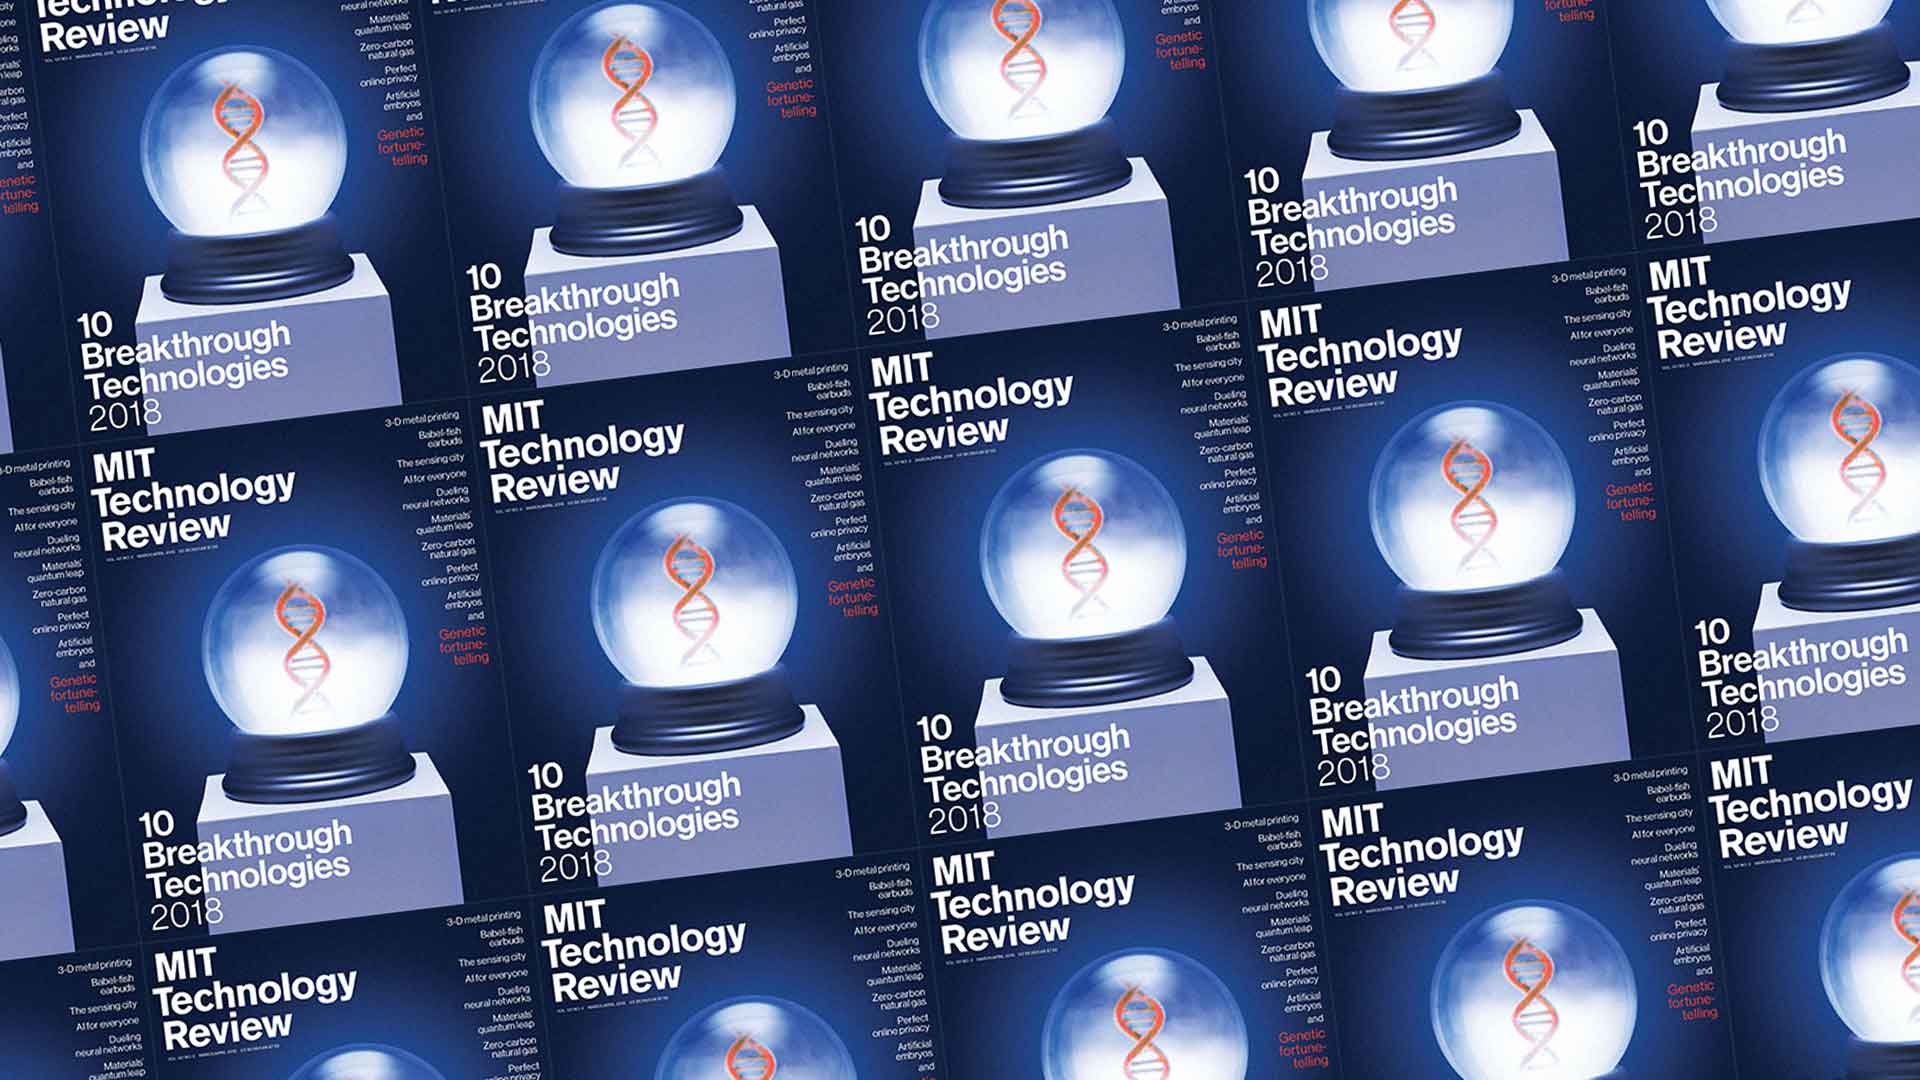 These Are The Transformative Technologies That MIT Says Will Shape Our Future